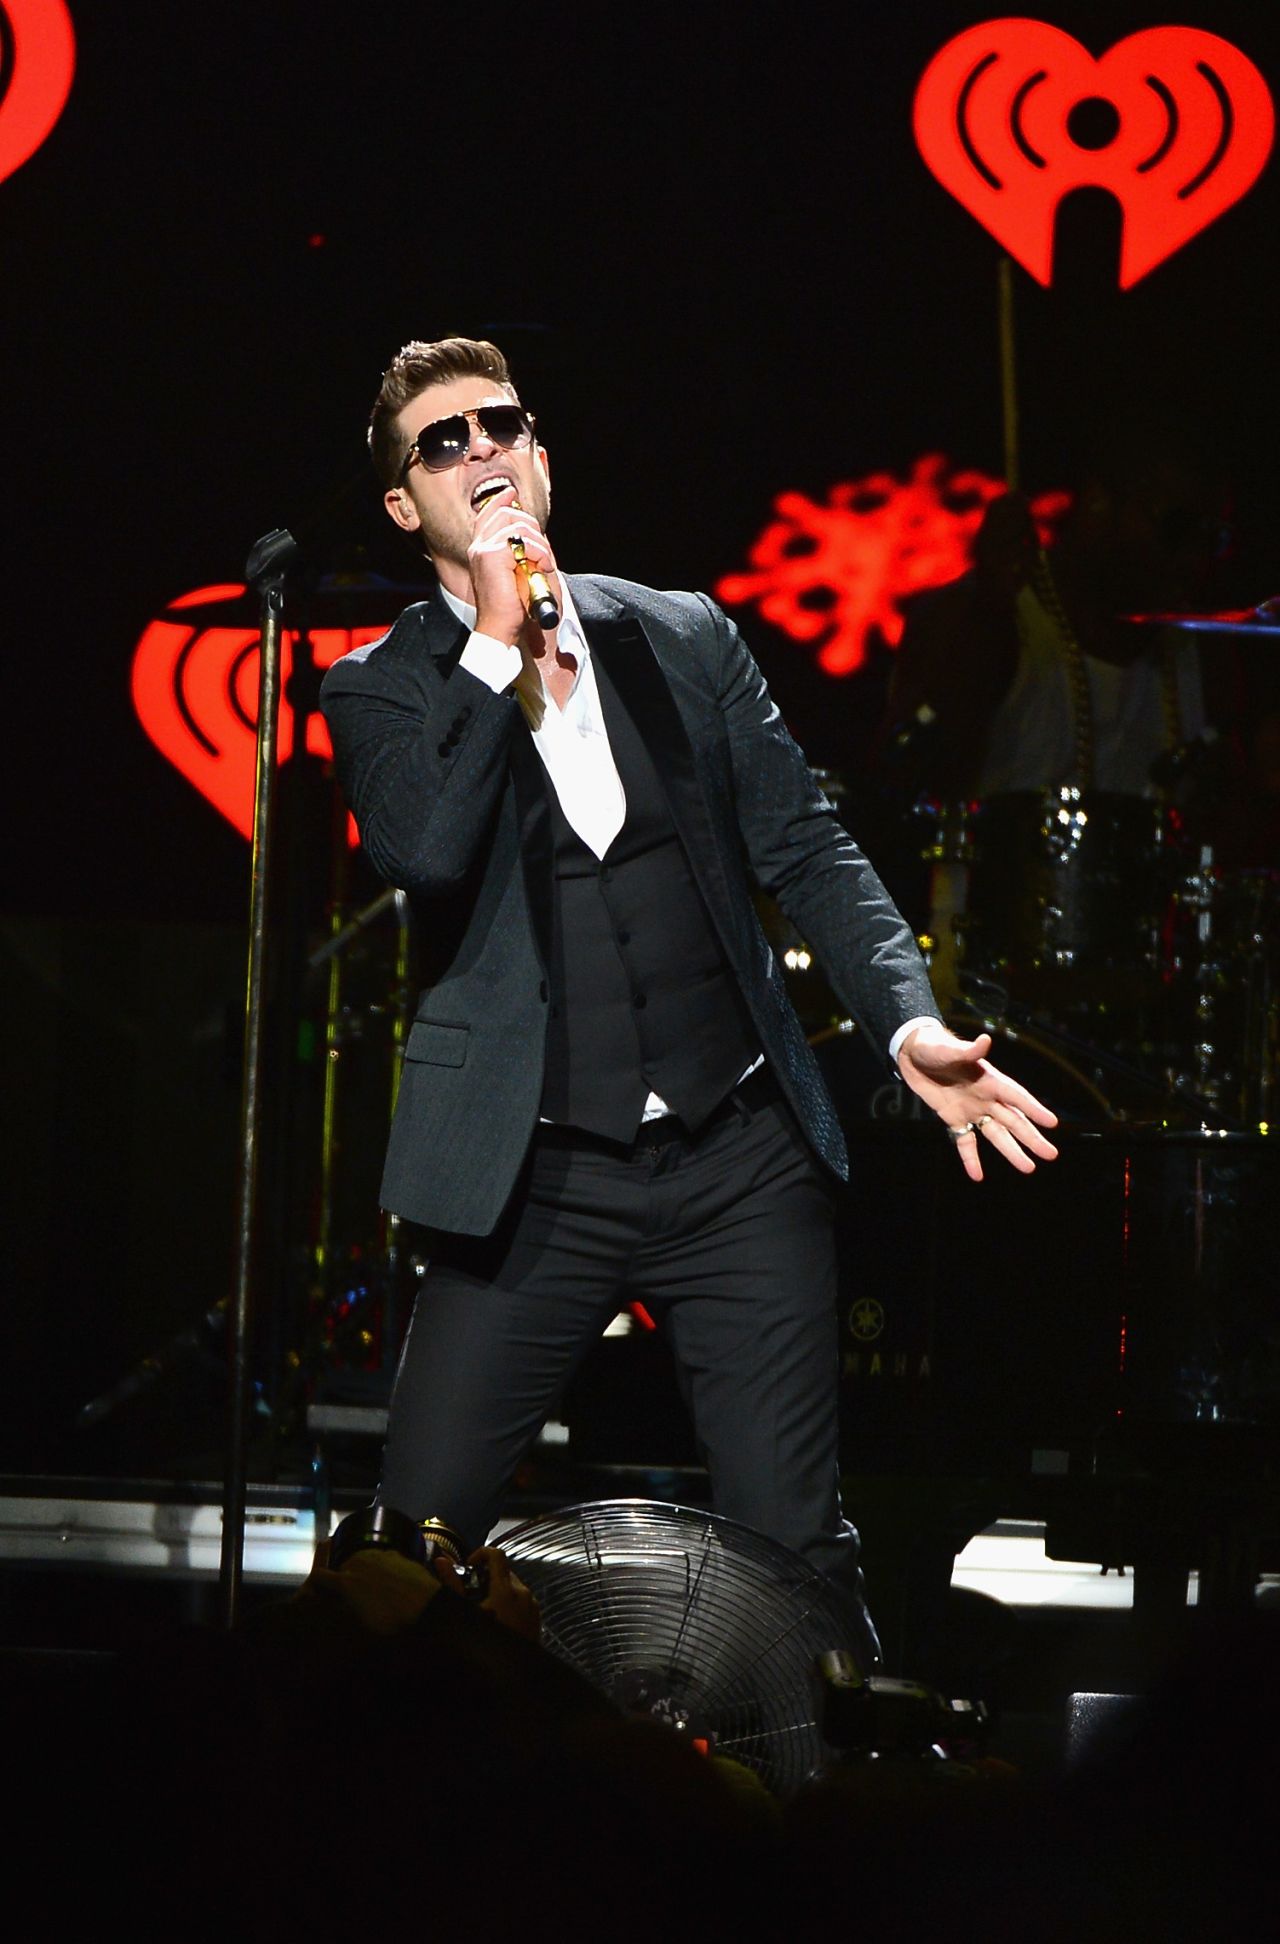 Robin Thicke gets into the groove at Hot 99.5's Jingle Ball 2013 in Washington D.C. on December 16.